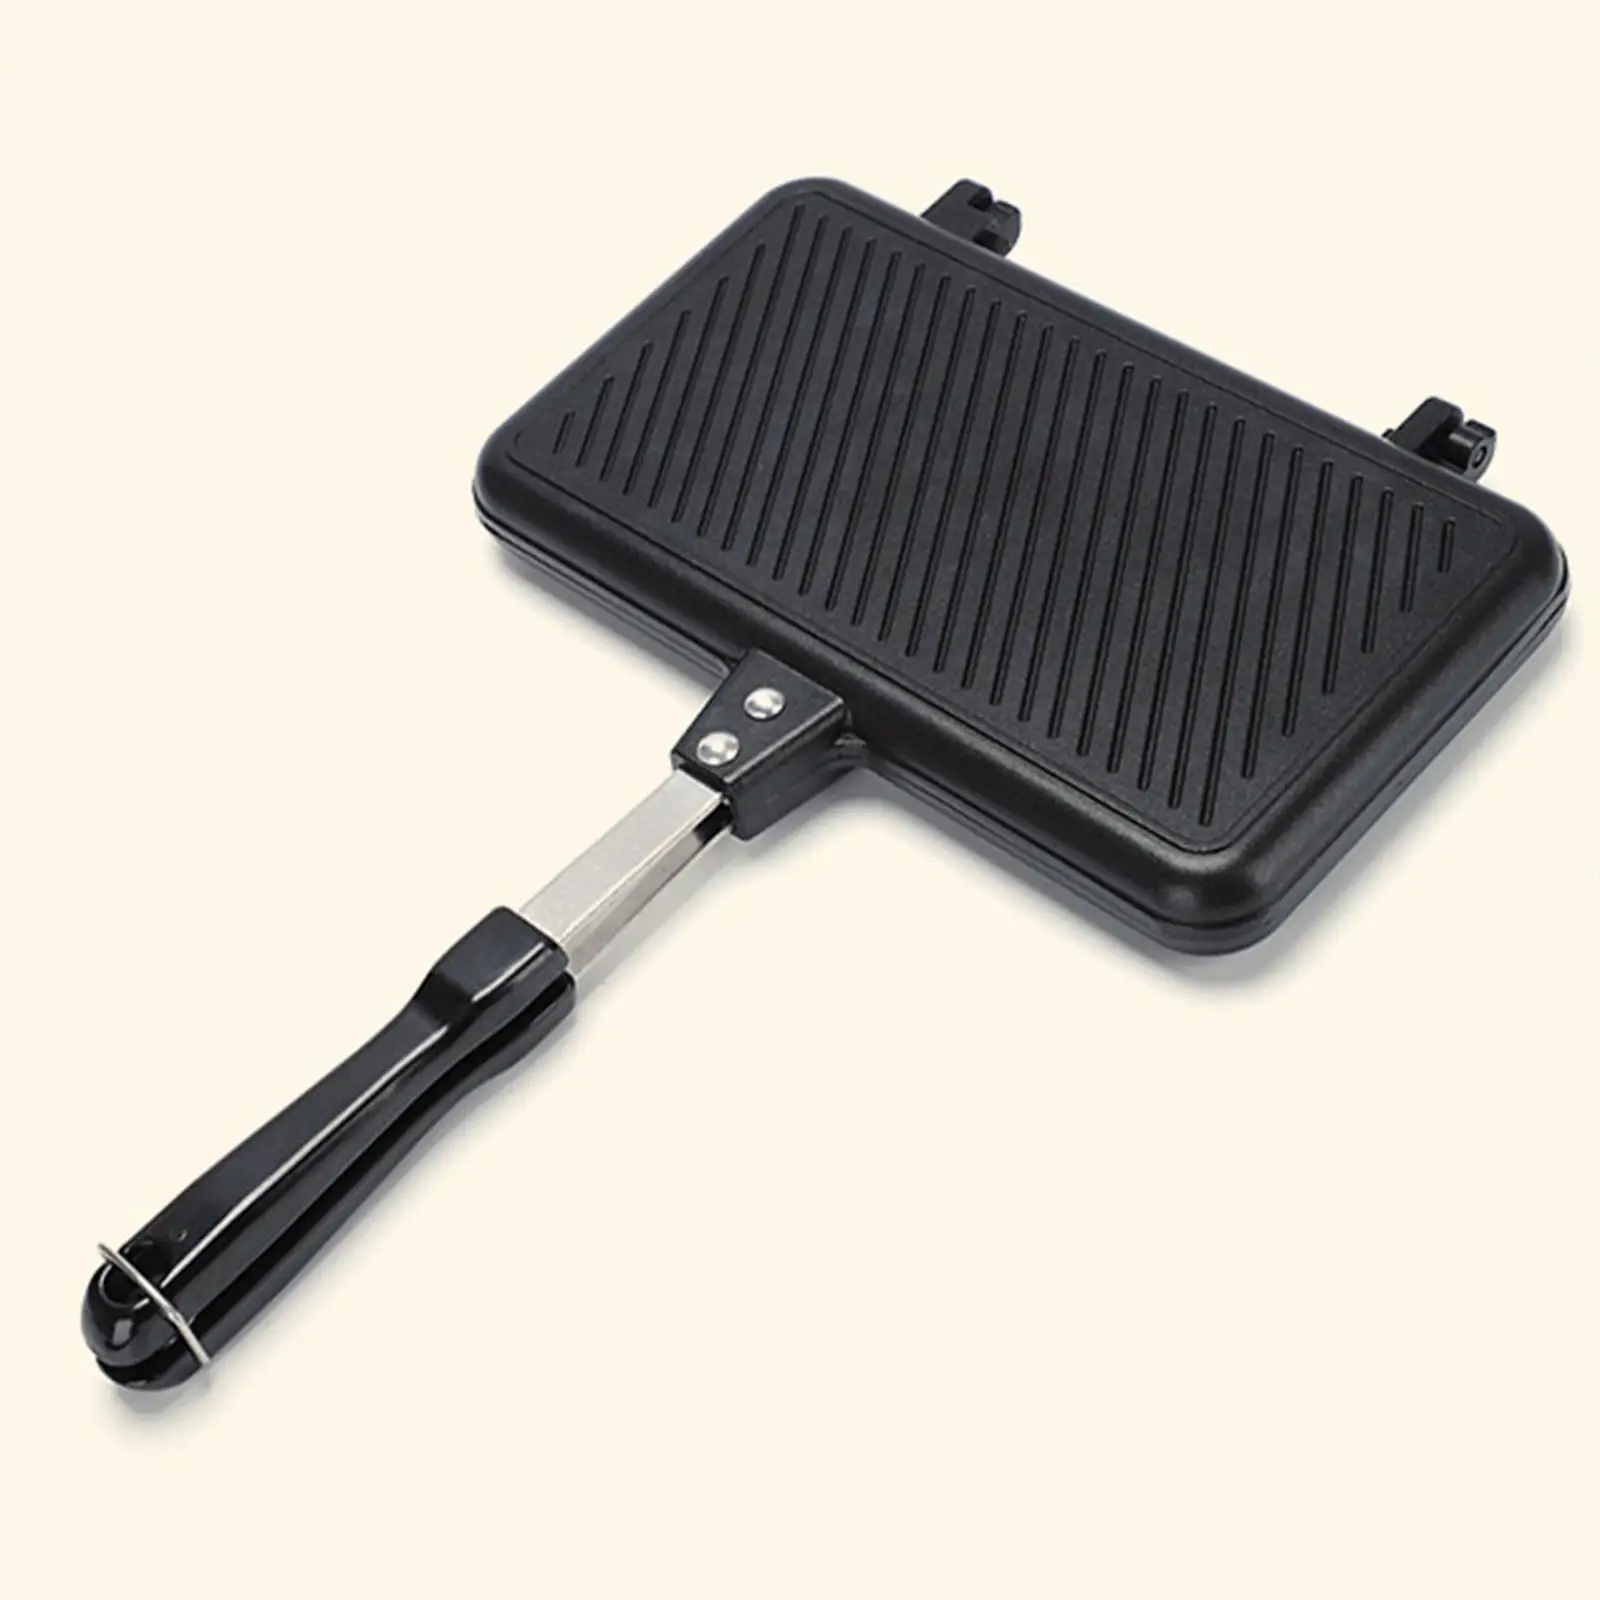 Sandwich Maker Cooking Baking Tools Tools with Handle Portable Breakfast Maker for Cafe Kitchen Restaurant Sandwich